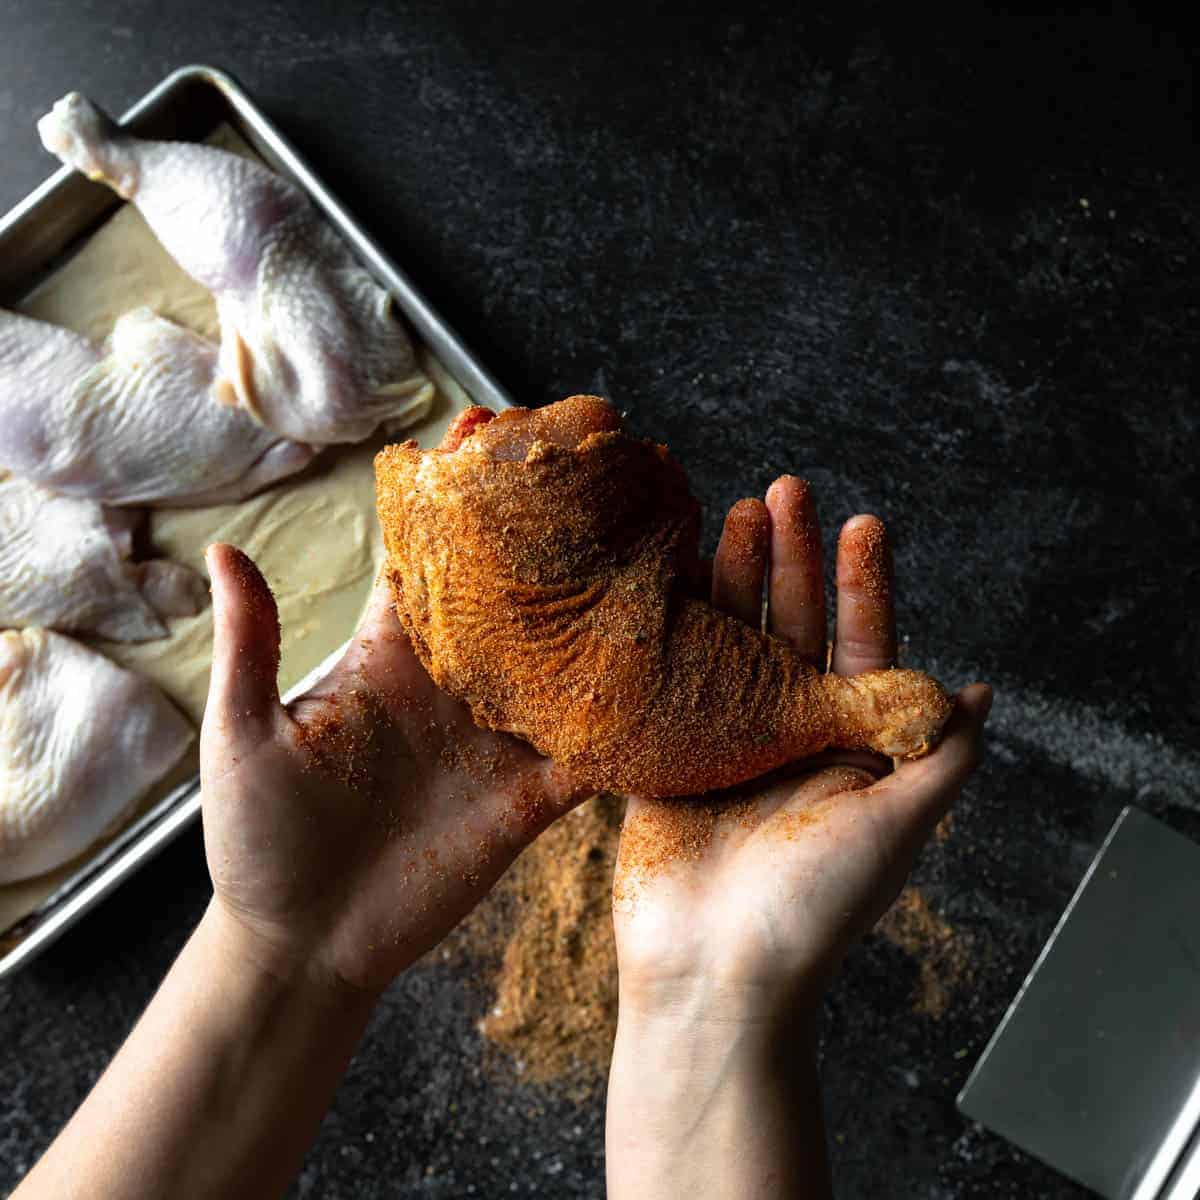 Hands holding a chicken quarter rubbed in a dry spice blend